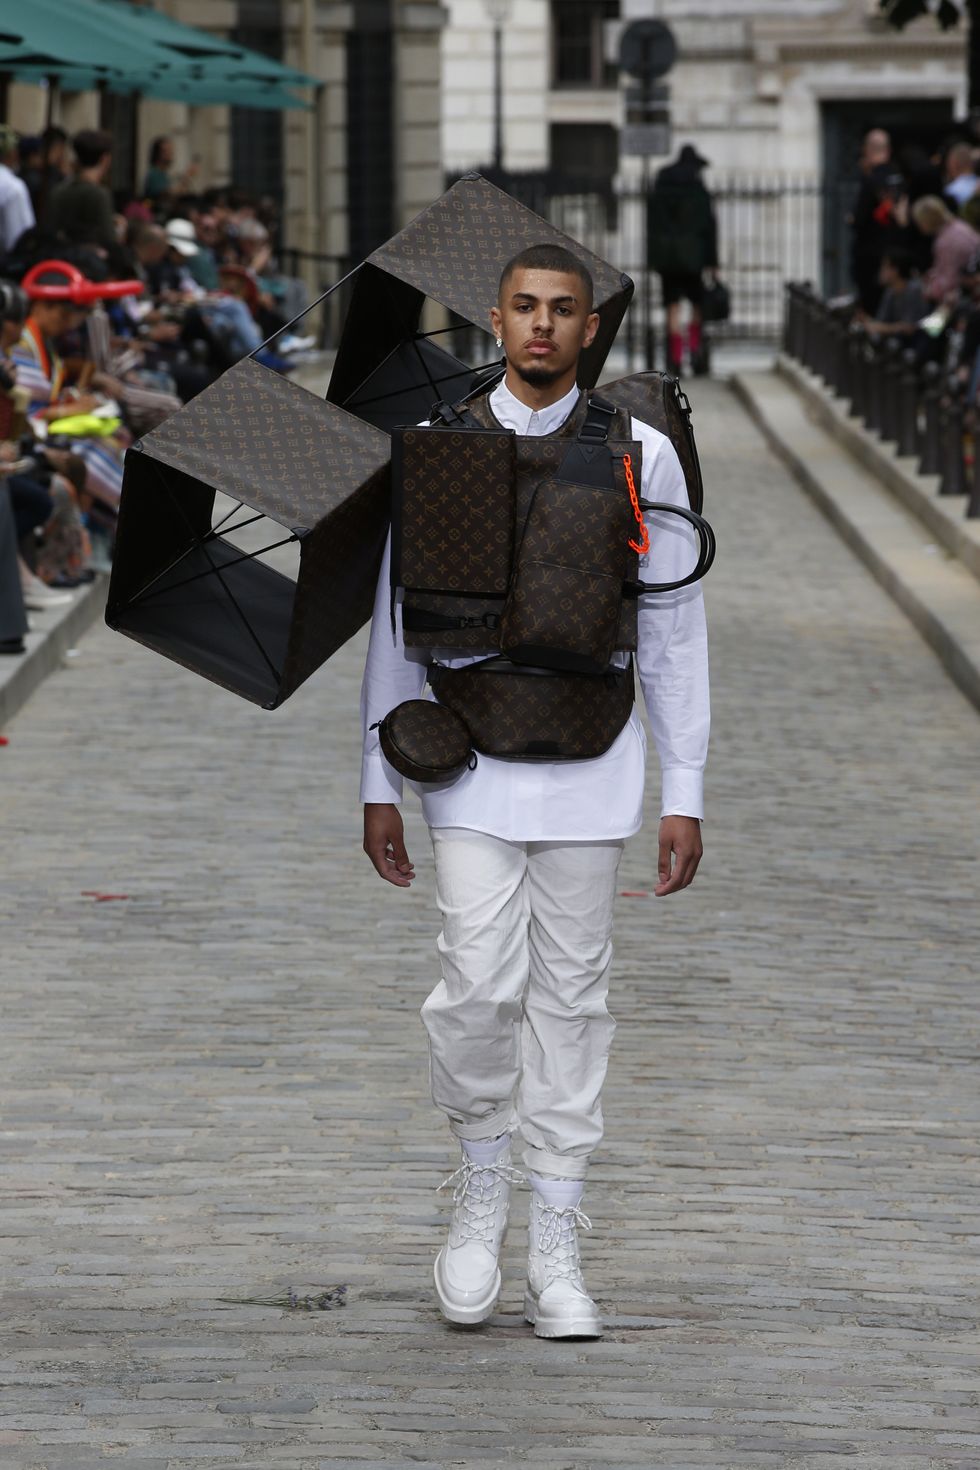 Louis Vuitton, Y/Project and Menswear Trends From Spring 2020 - PAPER ...